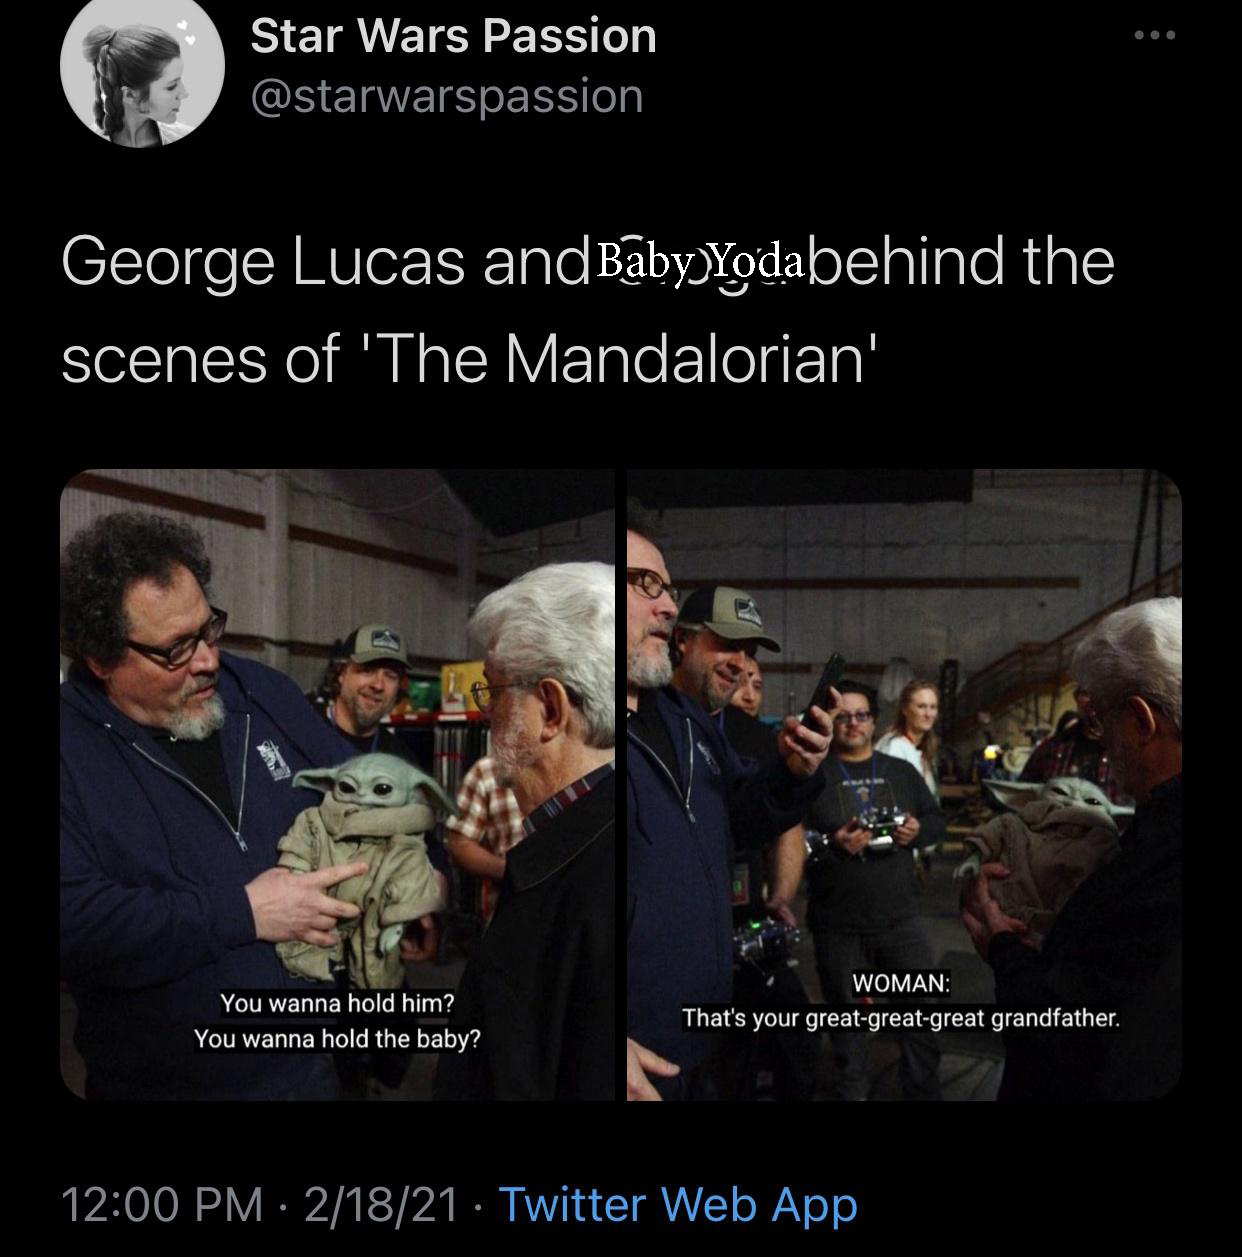 funny pics and memes - Star Wars George Lucas and Baby Yoda behind the scenes of 'The Mandalorian' You wanna hold him? You wanna hold the baby? Woman That's your great great great grandfather.